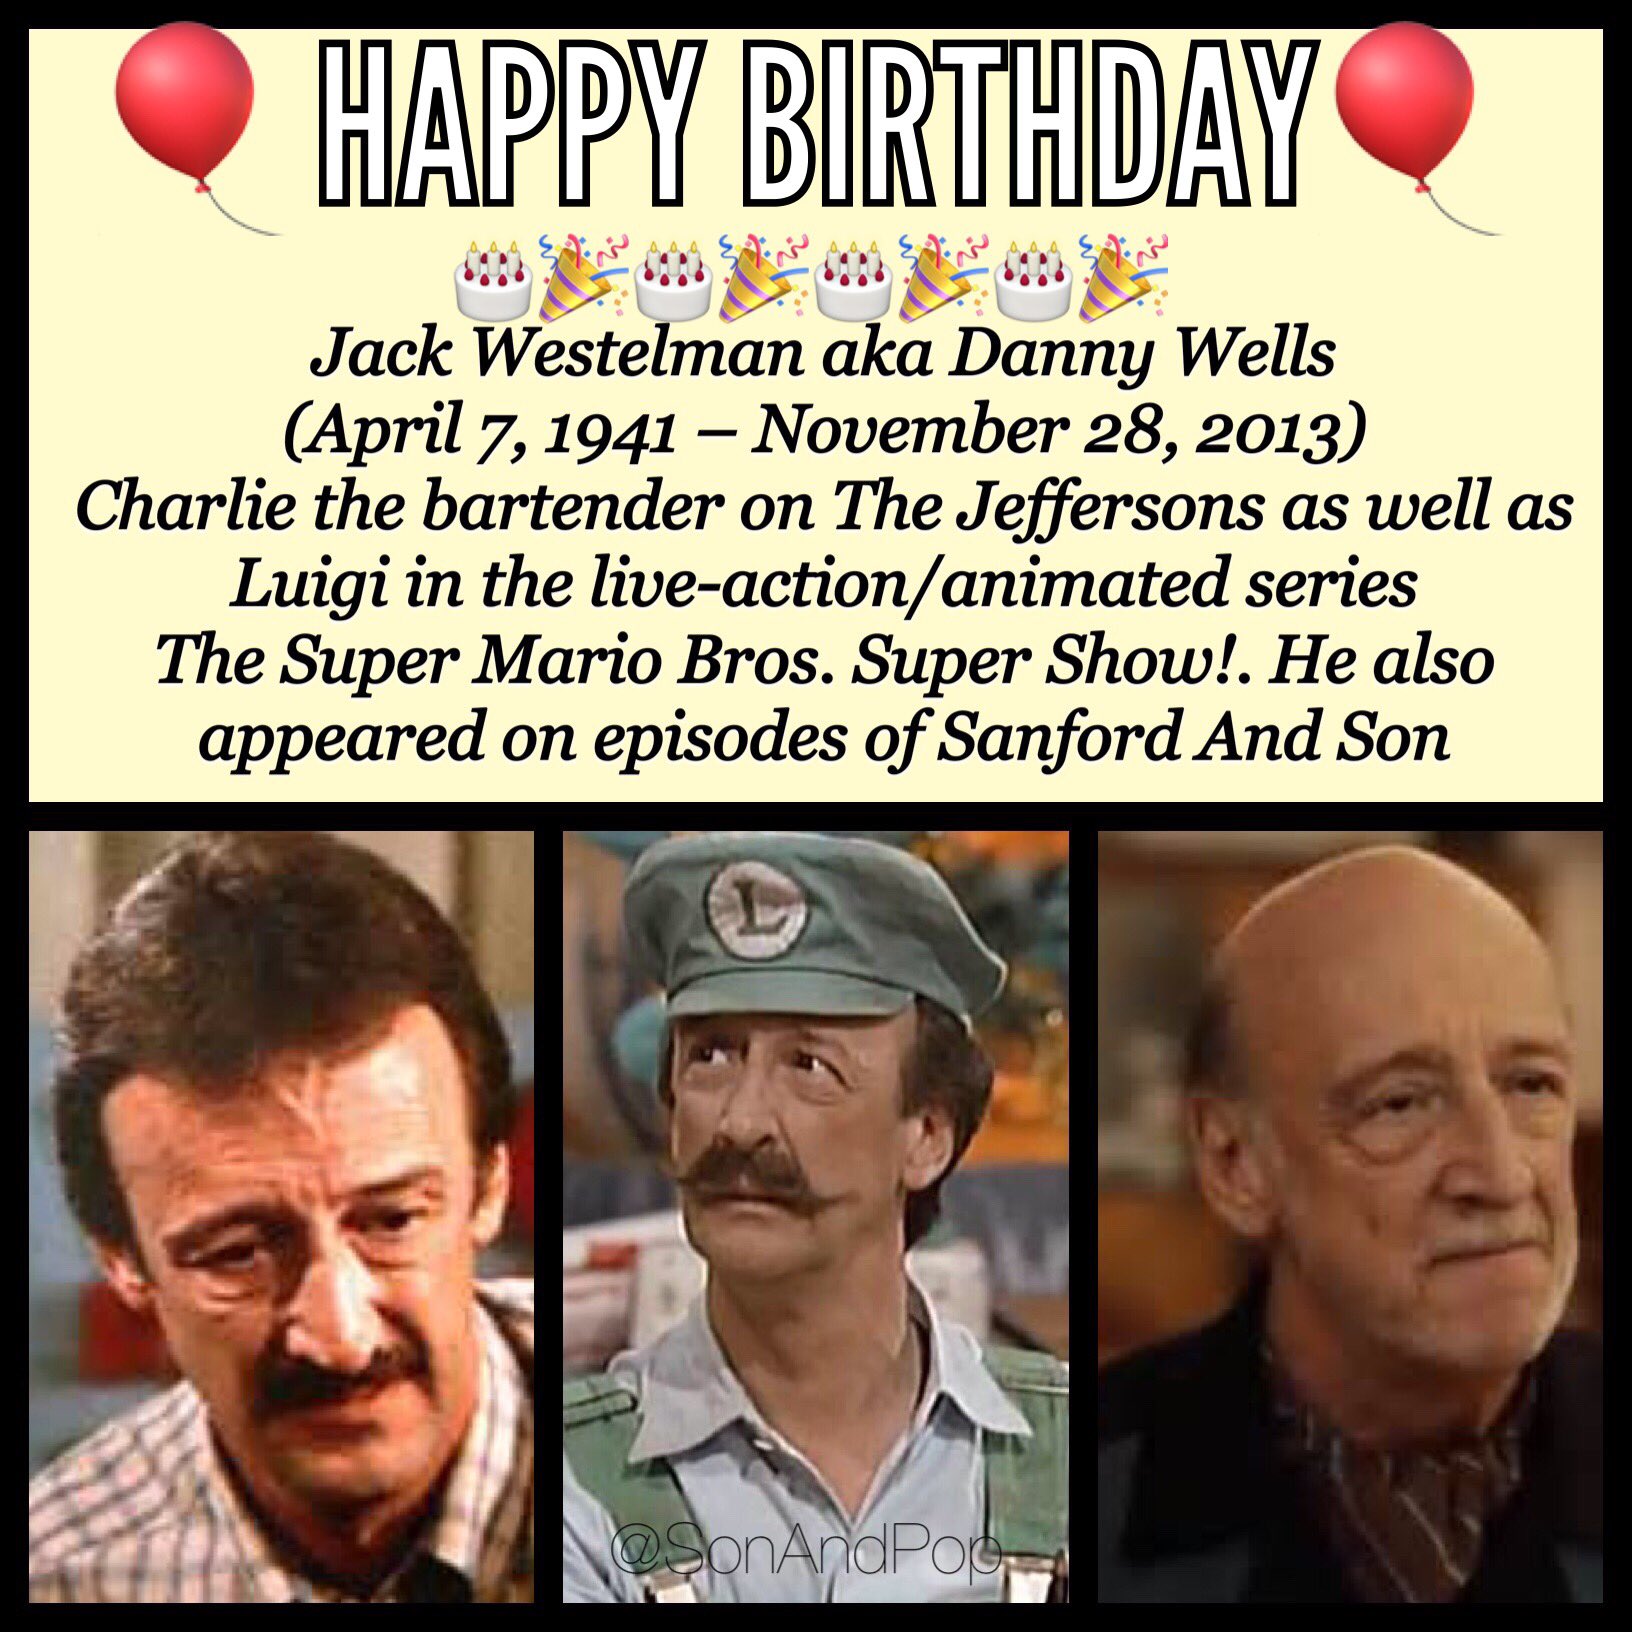 Happy Belated Birthday to the late Danny Wells.  